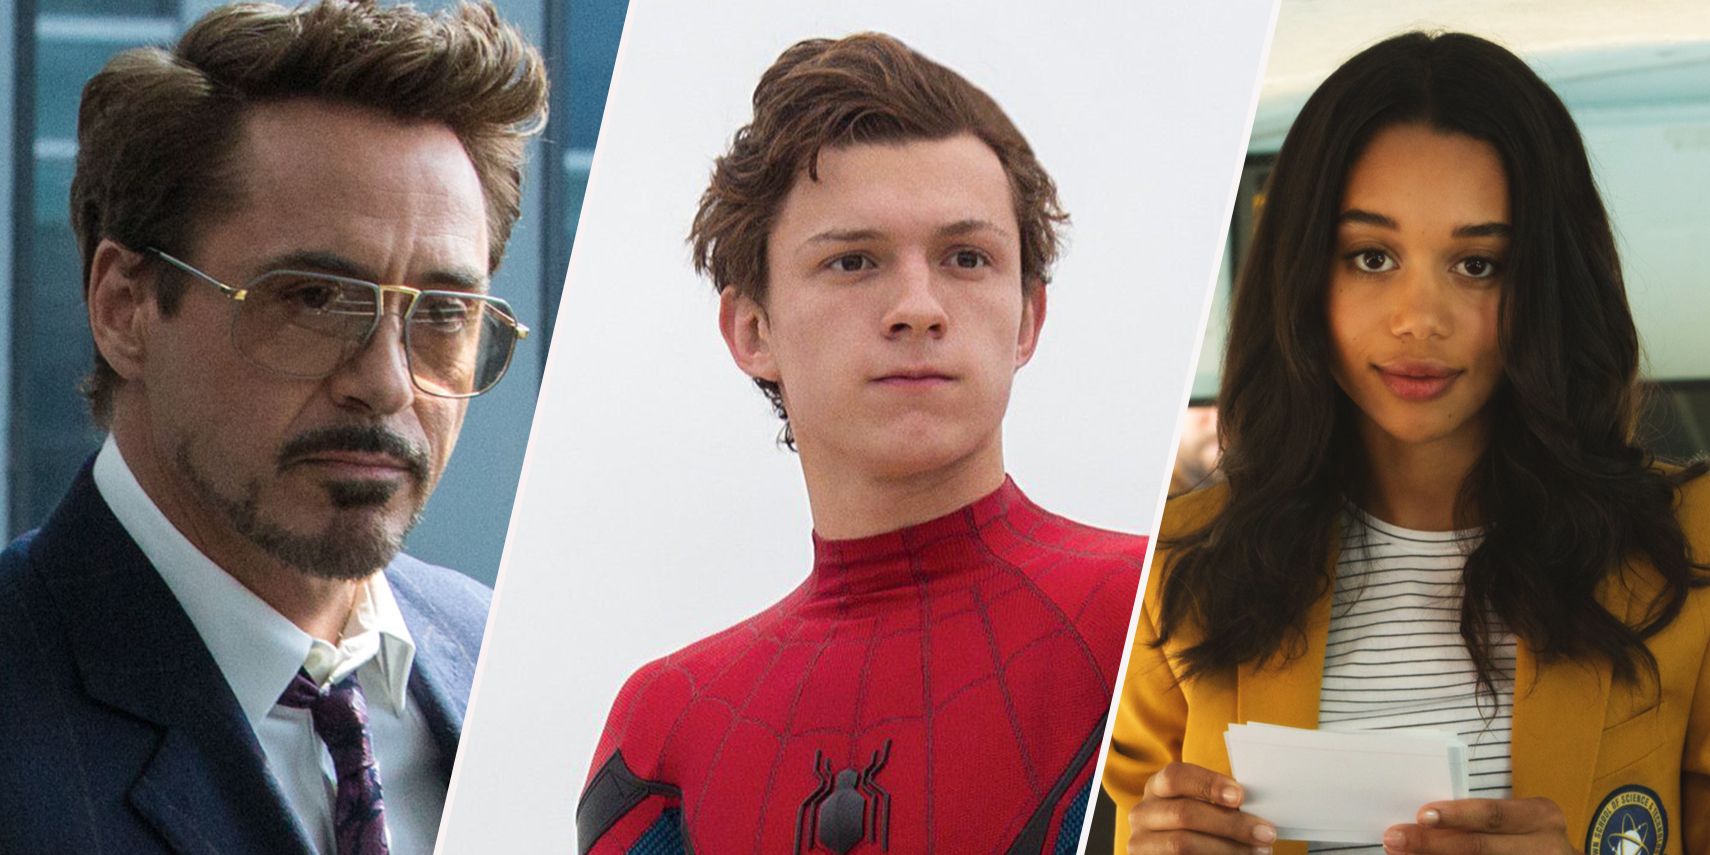 RDJ, Holland and Harrier in Spider-man: Homecoming